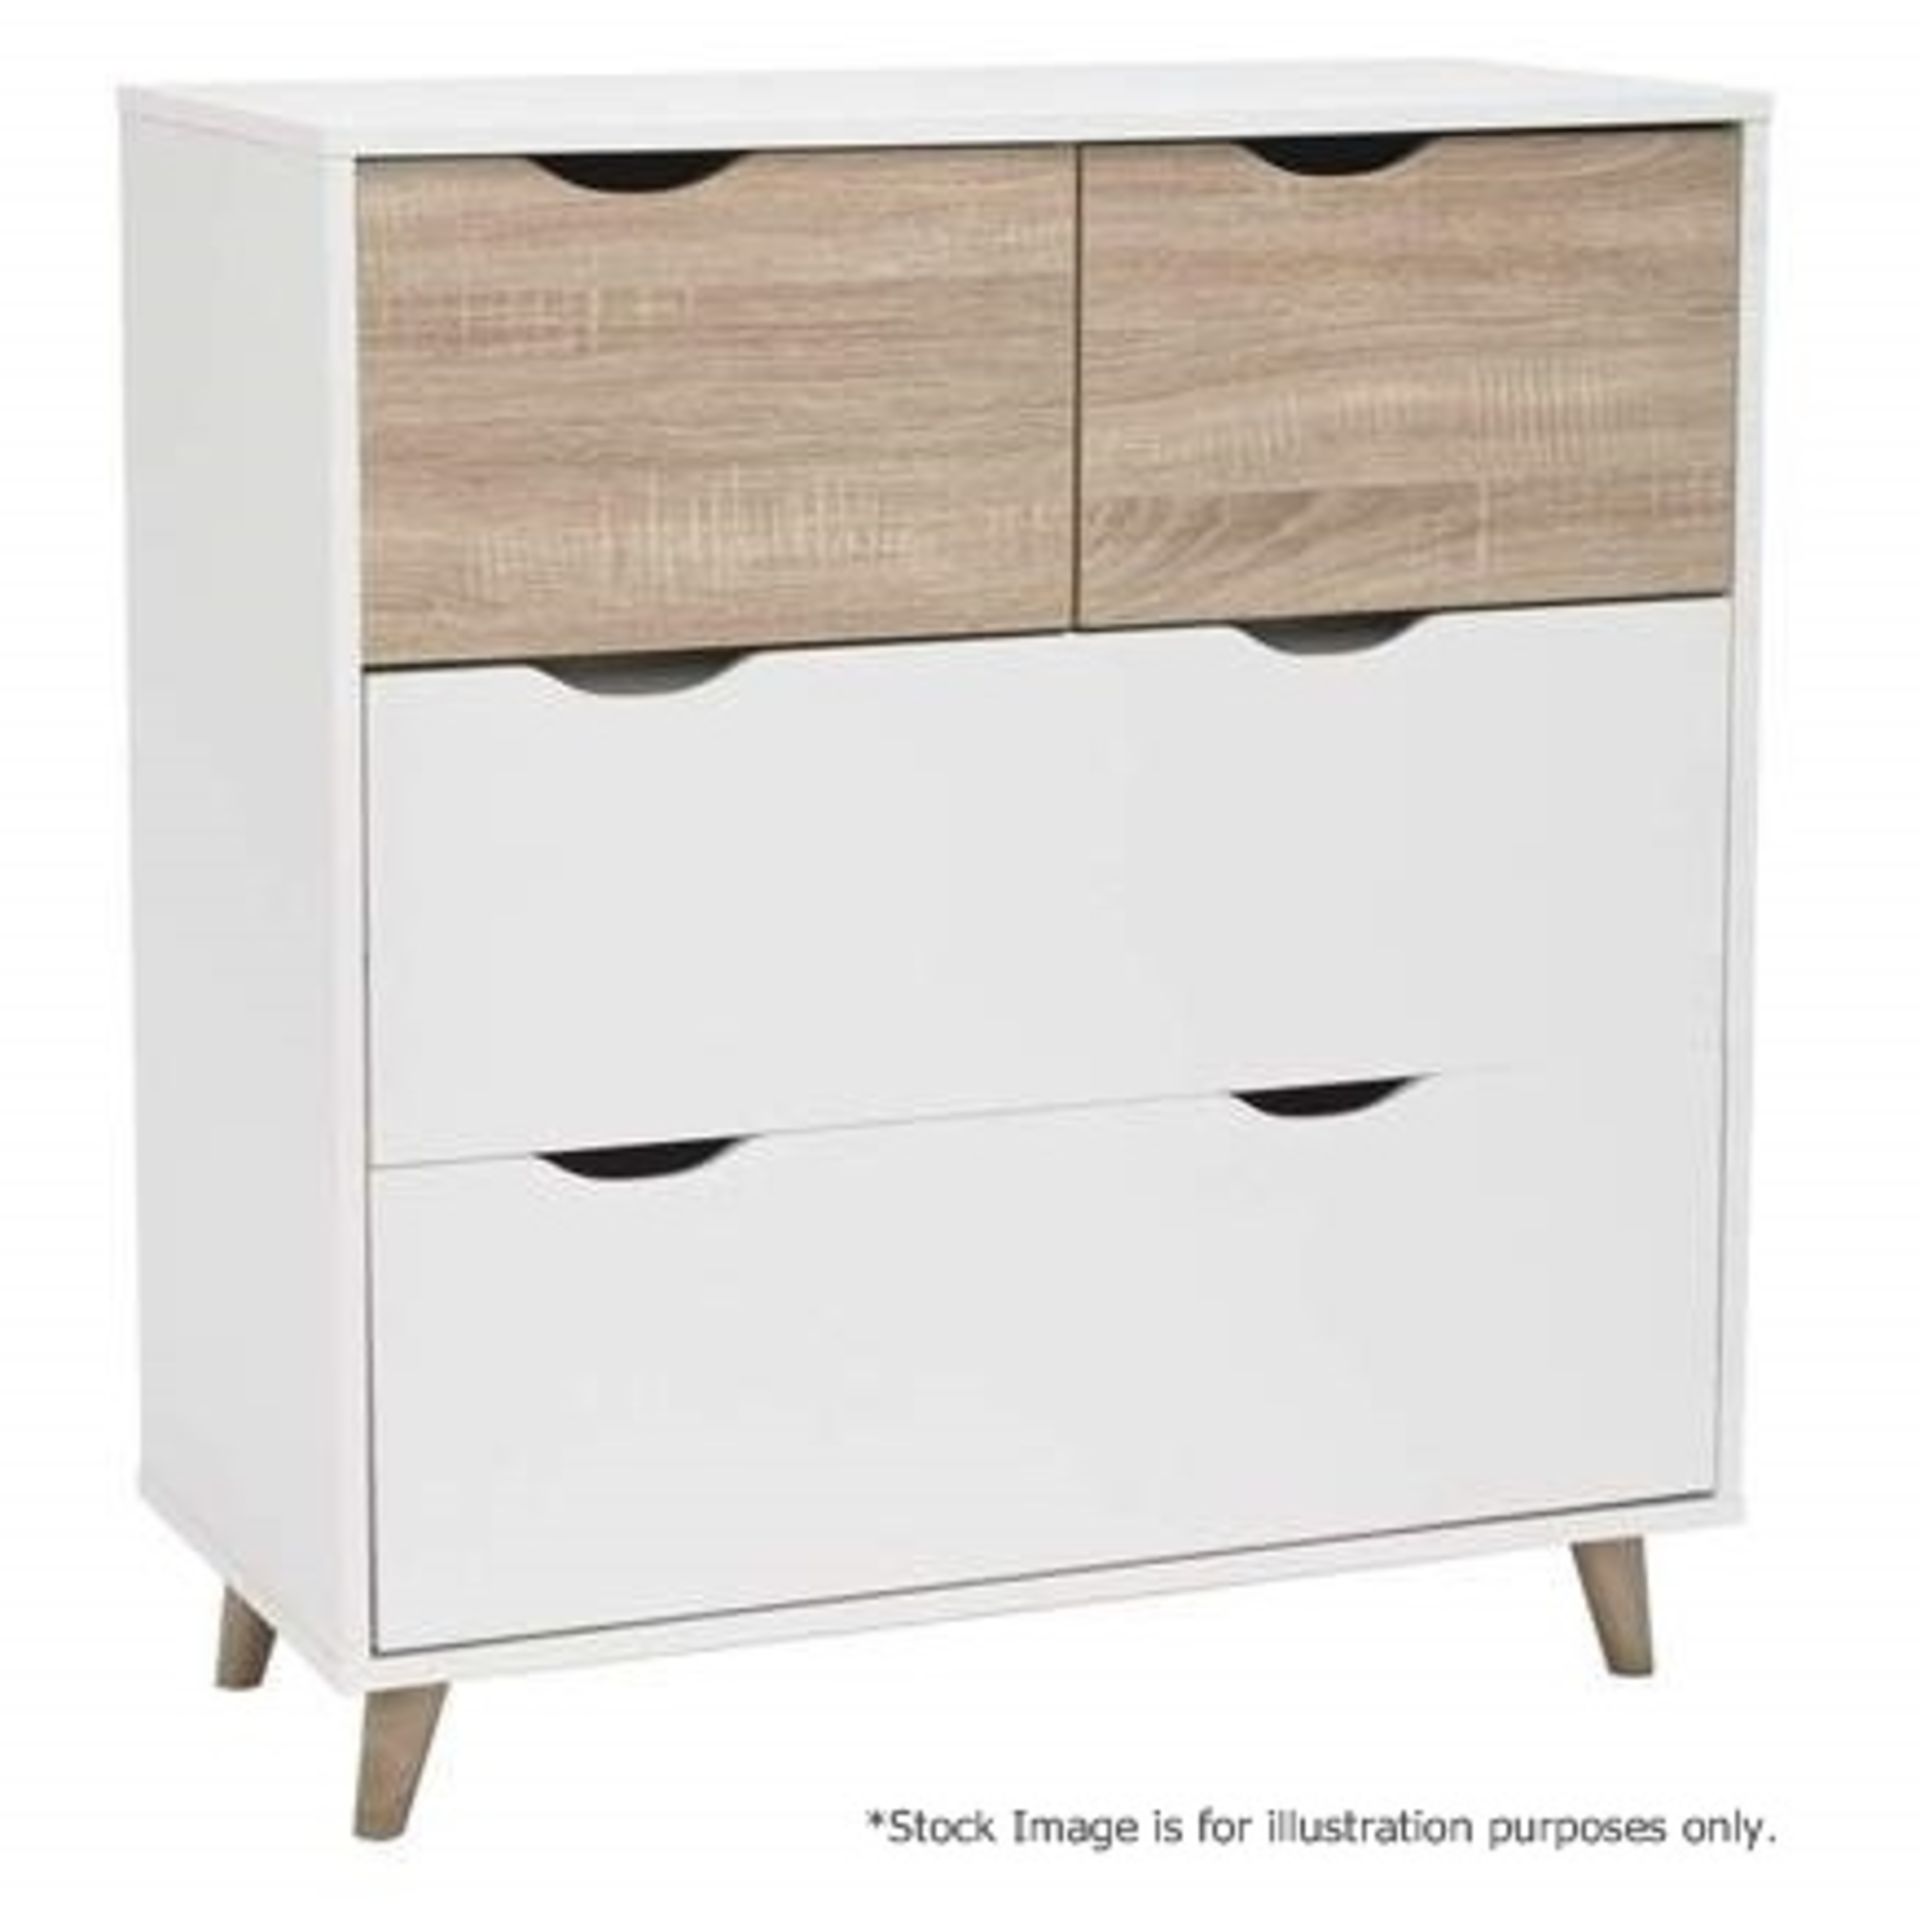 1 x 'Stockholm' Scandinavian Style Chest Of Drawers - Dimensions: 82 x 90 x 39cm - Brand New Boxed - Image 3 of 5